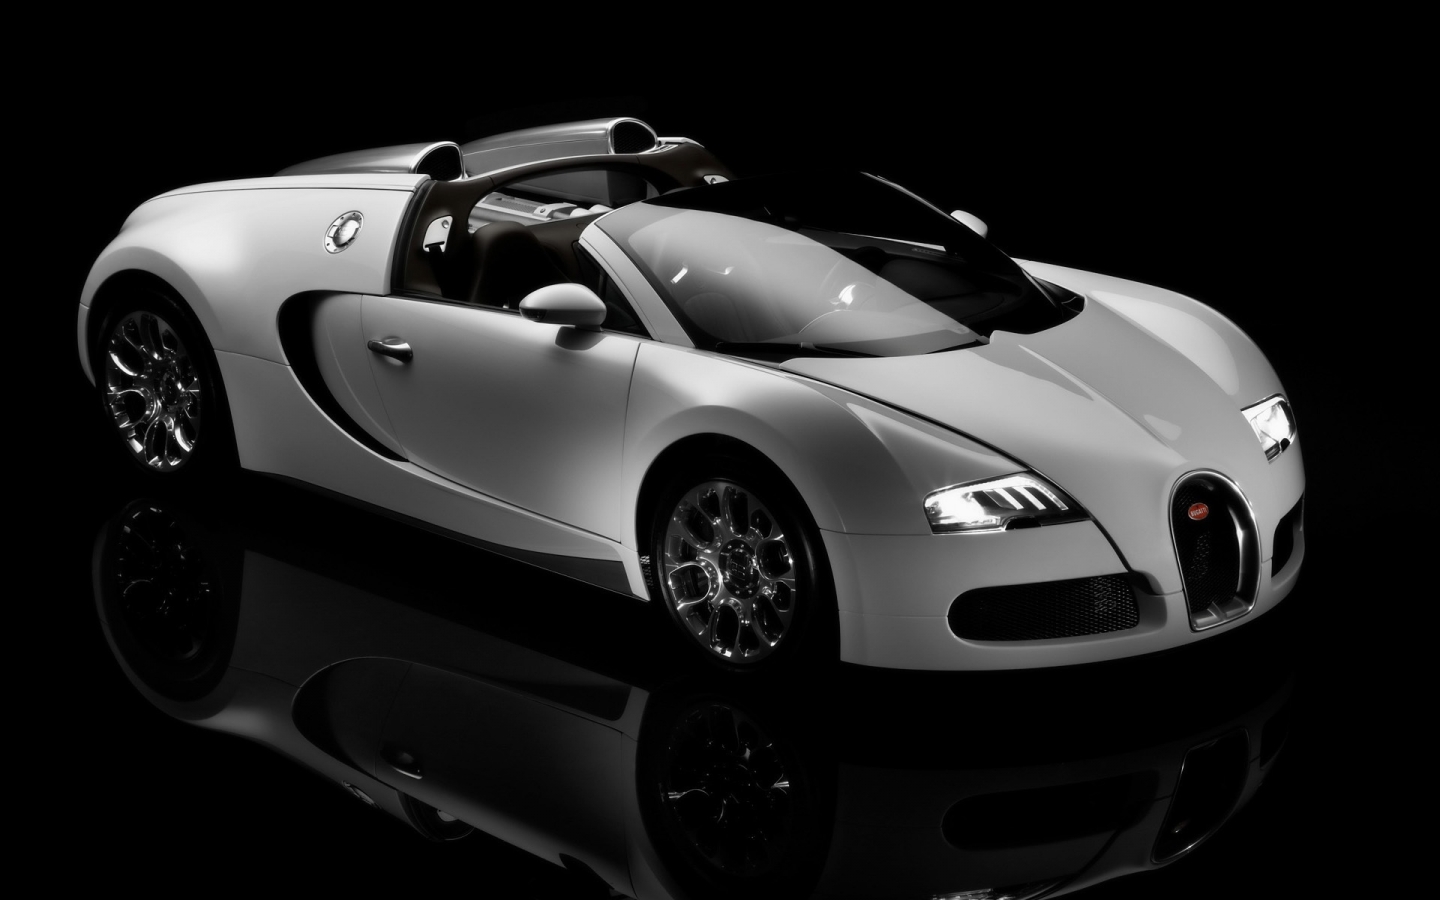 Bugatti Veyron 16.4 Grand Sport Production 2009 - Studio Front And Side for 1440 x 900 widescreen resolution